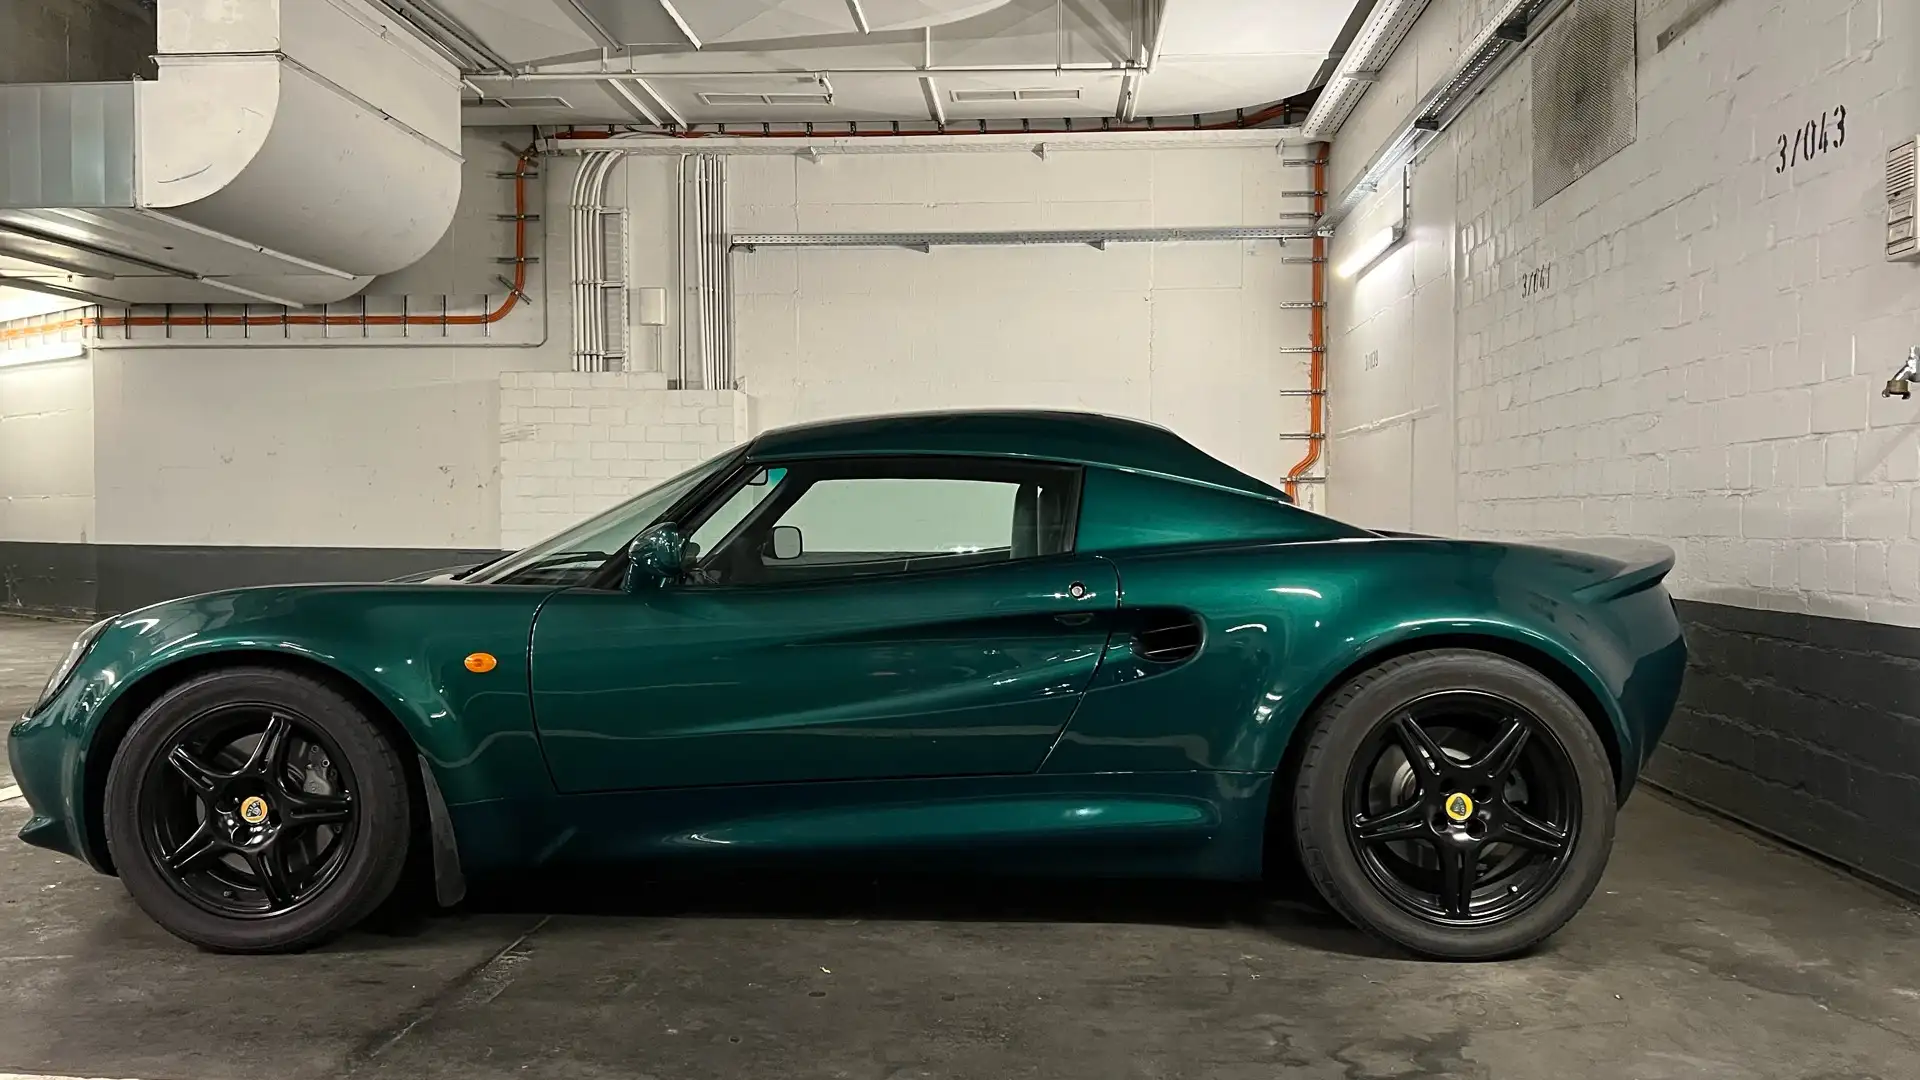 Lotus Elise LHD, Rotec, sehr guter Zustand Yeşil - 2